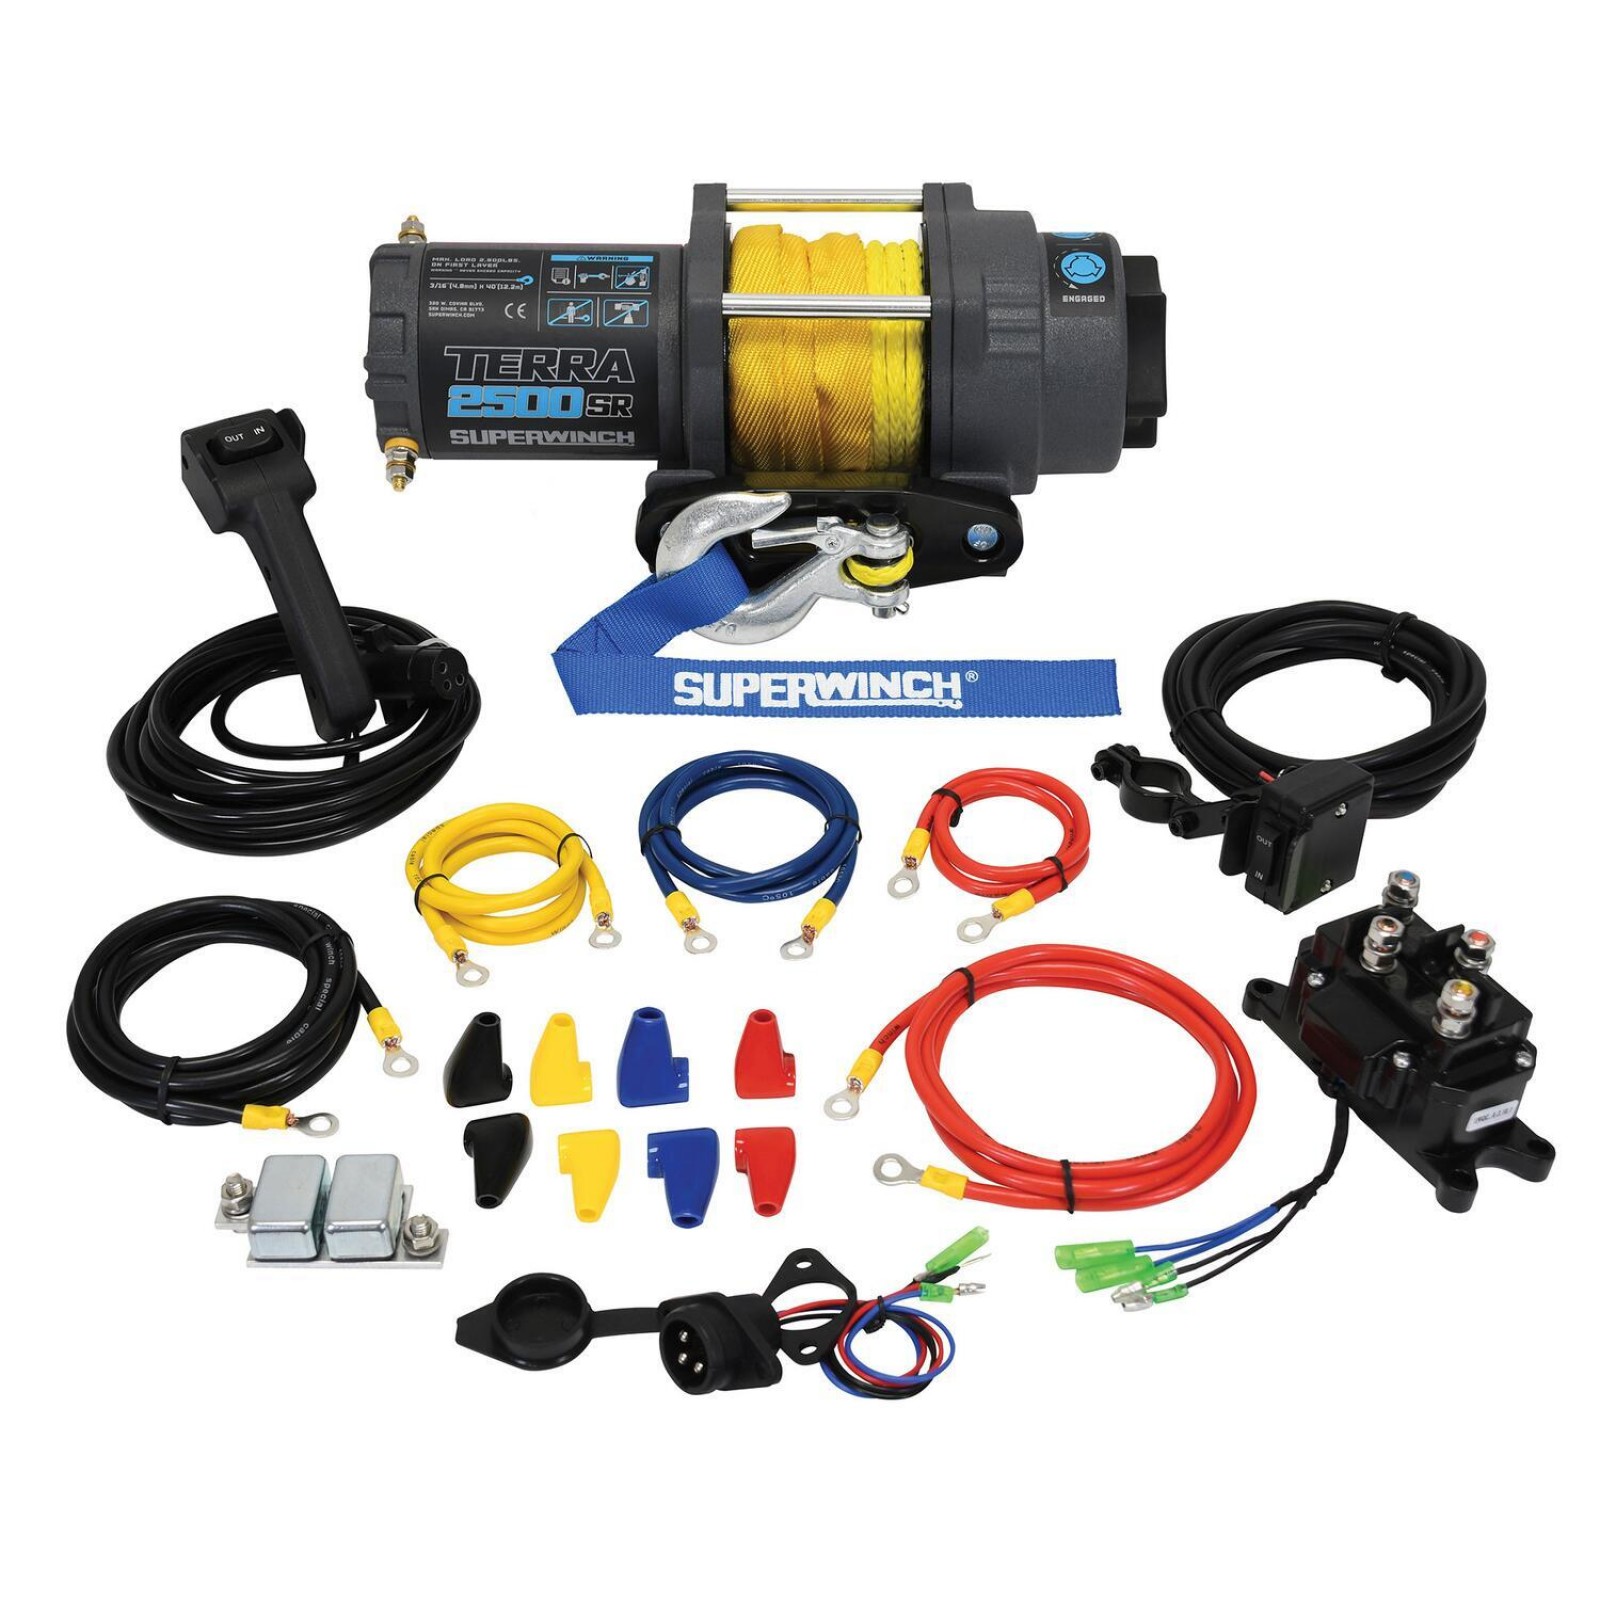 Terra 2500SR Winch with Synthetic Rope